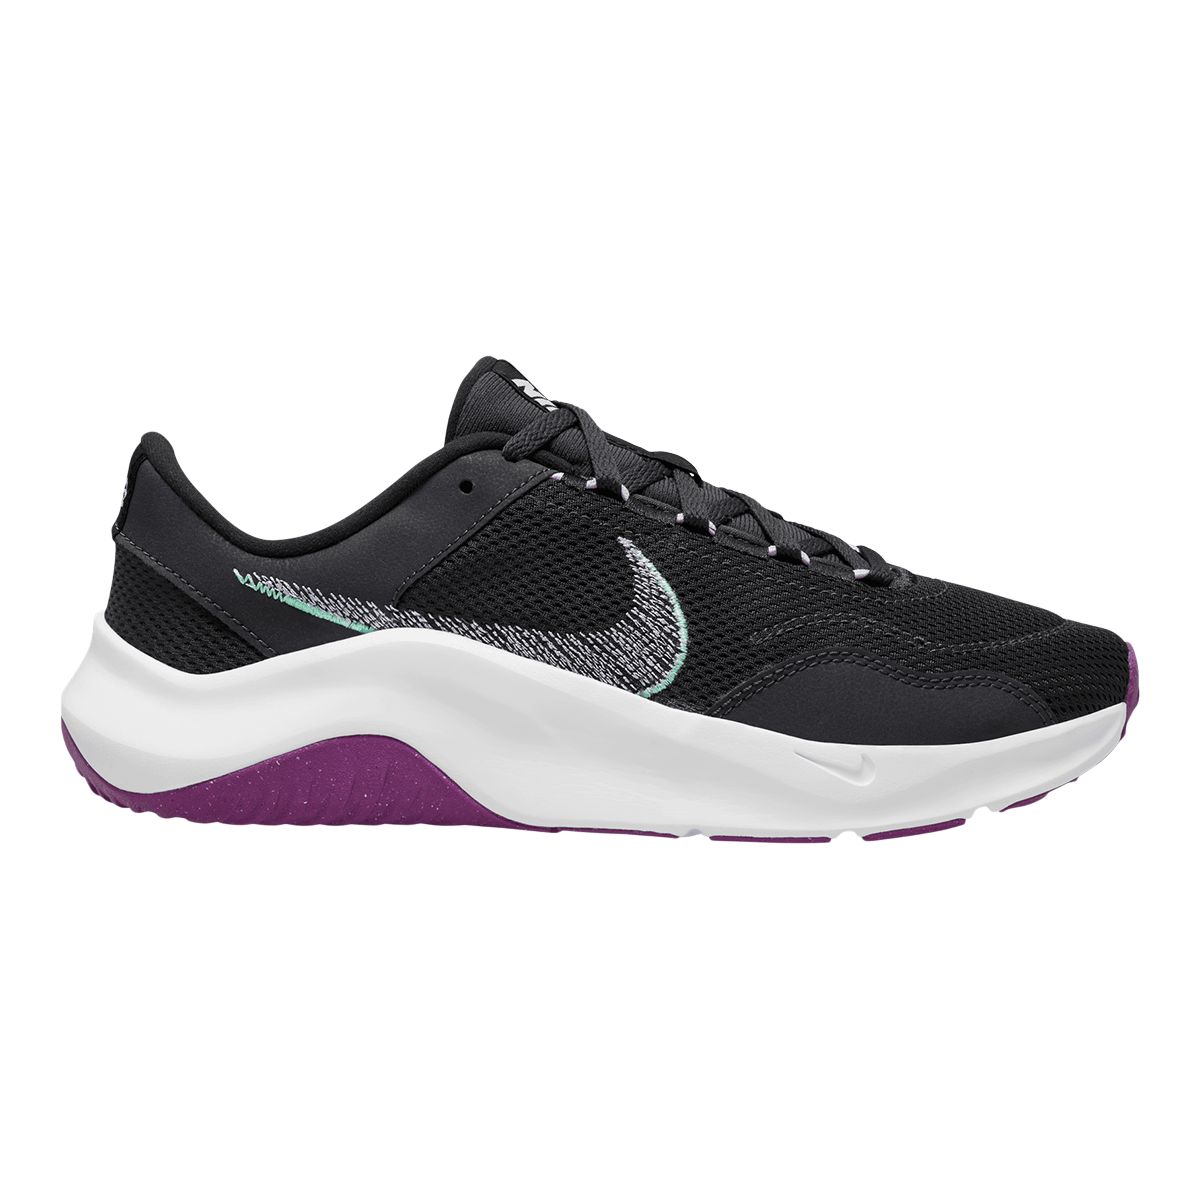 Nike Women's Revolution 6 Running Shoes, Cushioned, Breathable